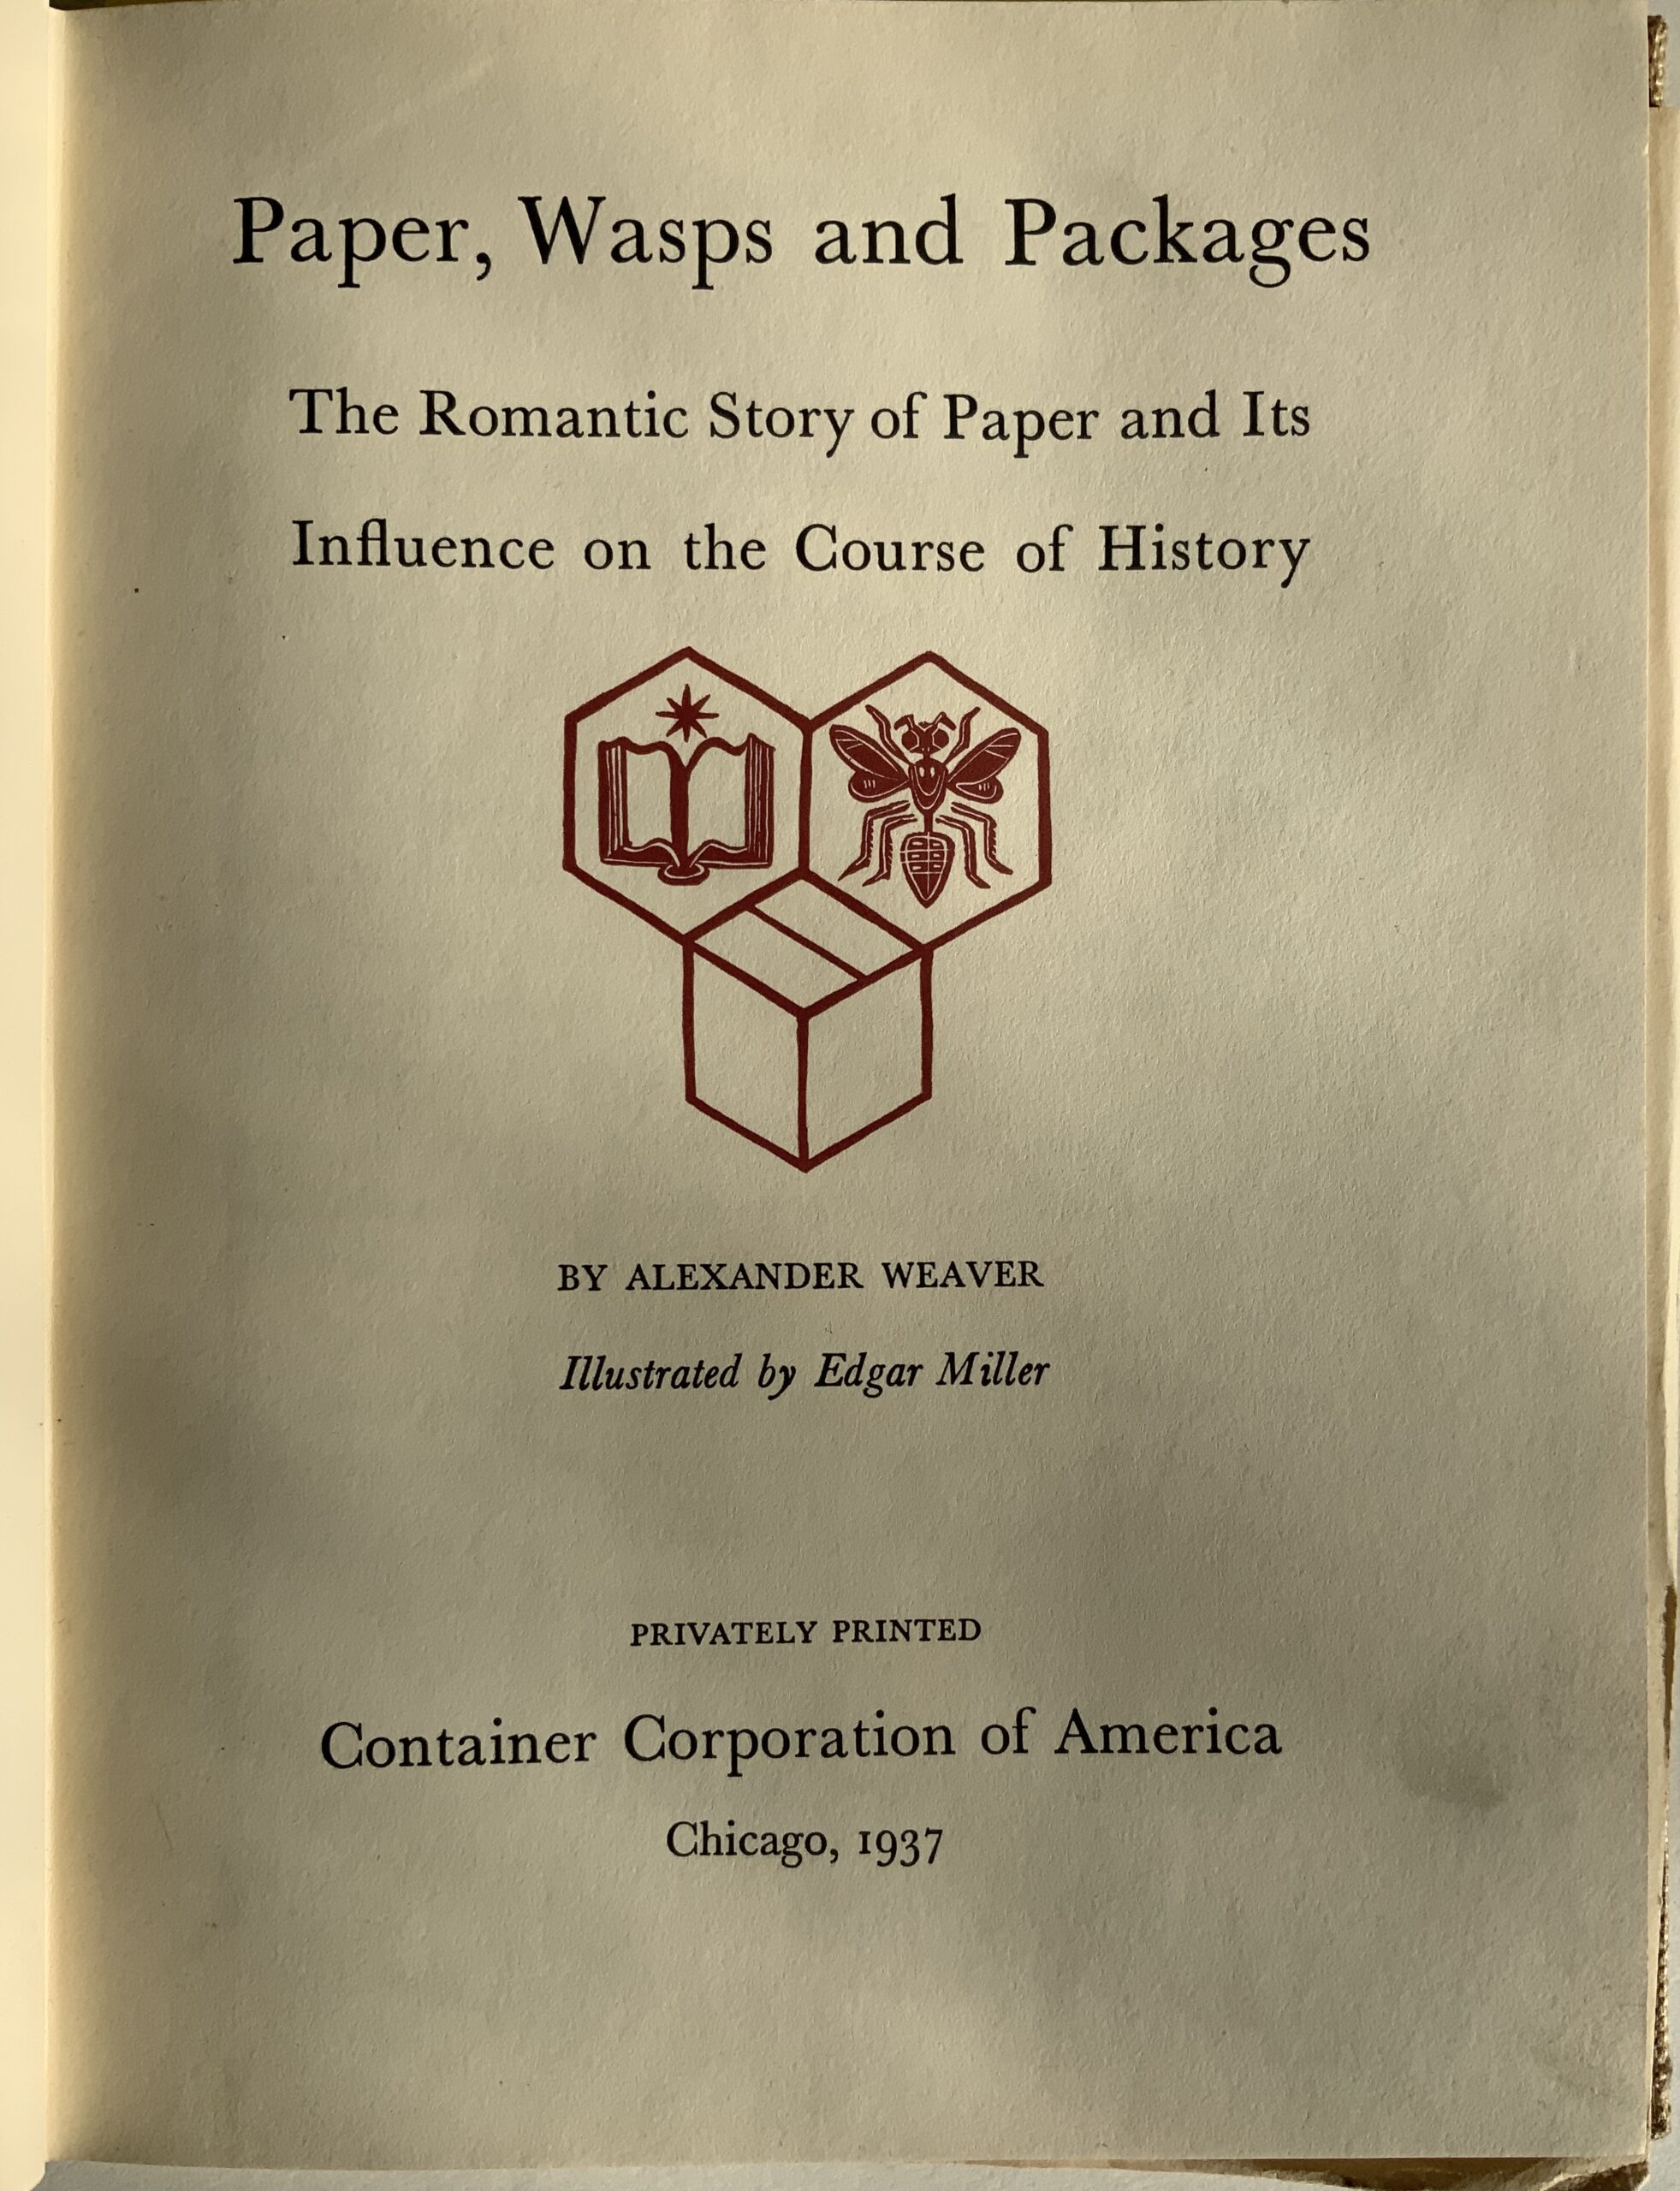 M279	PAPER WASPS AND PACKAGES - THE ROMANTIC STORY OF PAPER AND ITS INFLUENCE ON THE COURSE OF HISTORY